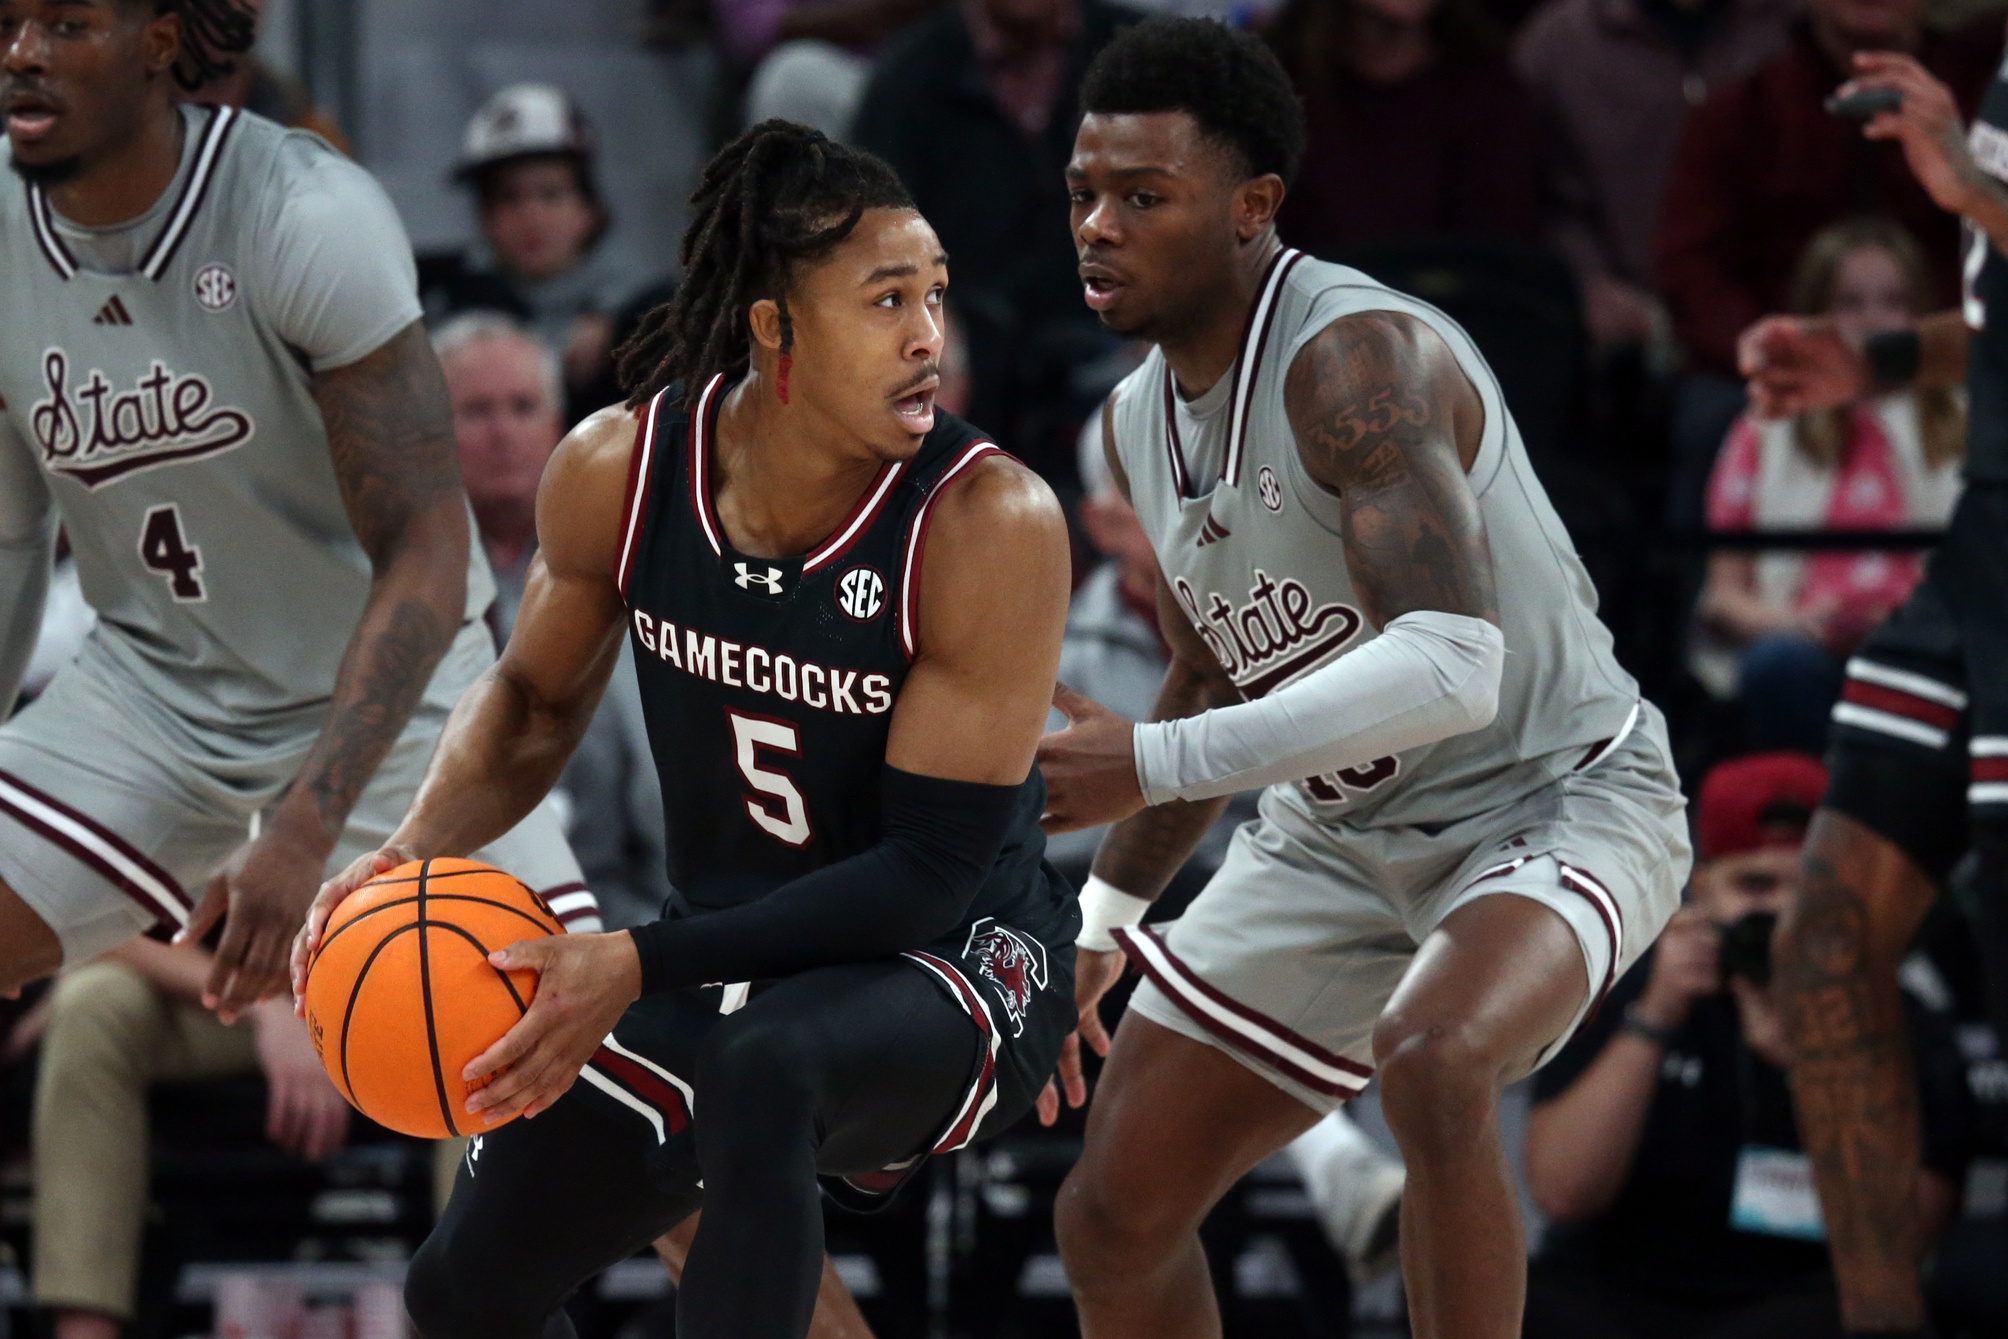 South Carolina Gamecocks guard Meechie Johnson (5) handles the ball as Mississippi State Bulldogs guard Dashawn Davis (10) defends during the second half at Humphrey Coliseum. Mandatory Credit: Petre Thomas-USA TODAY Sports